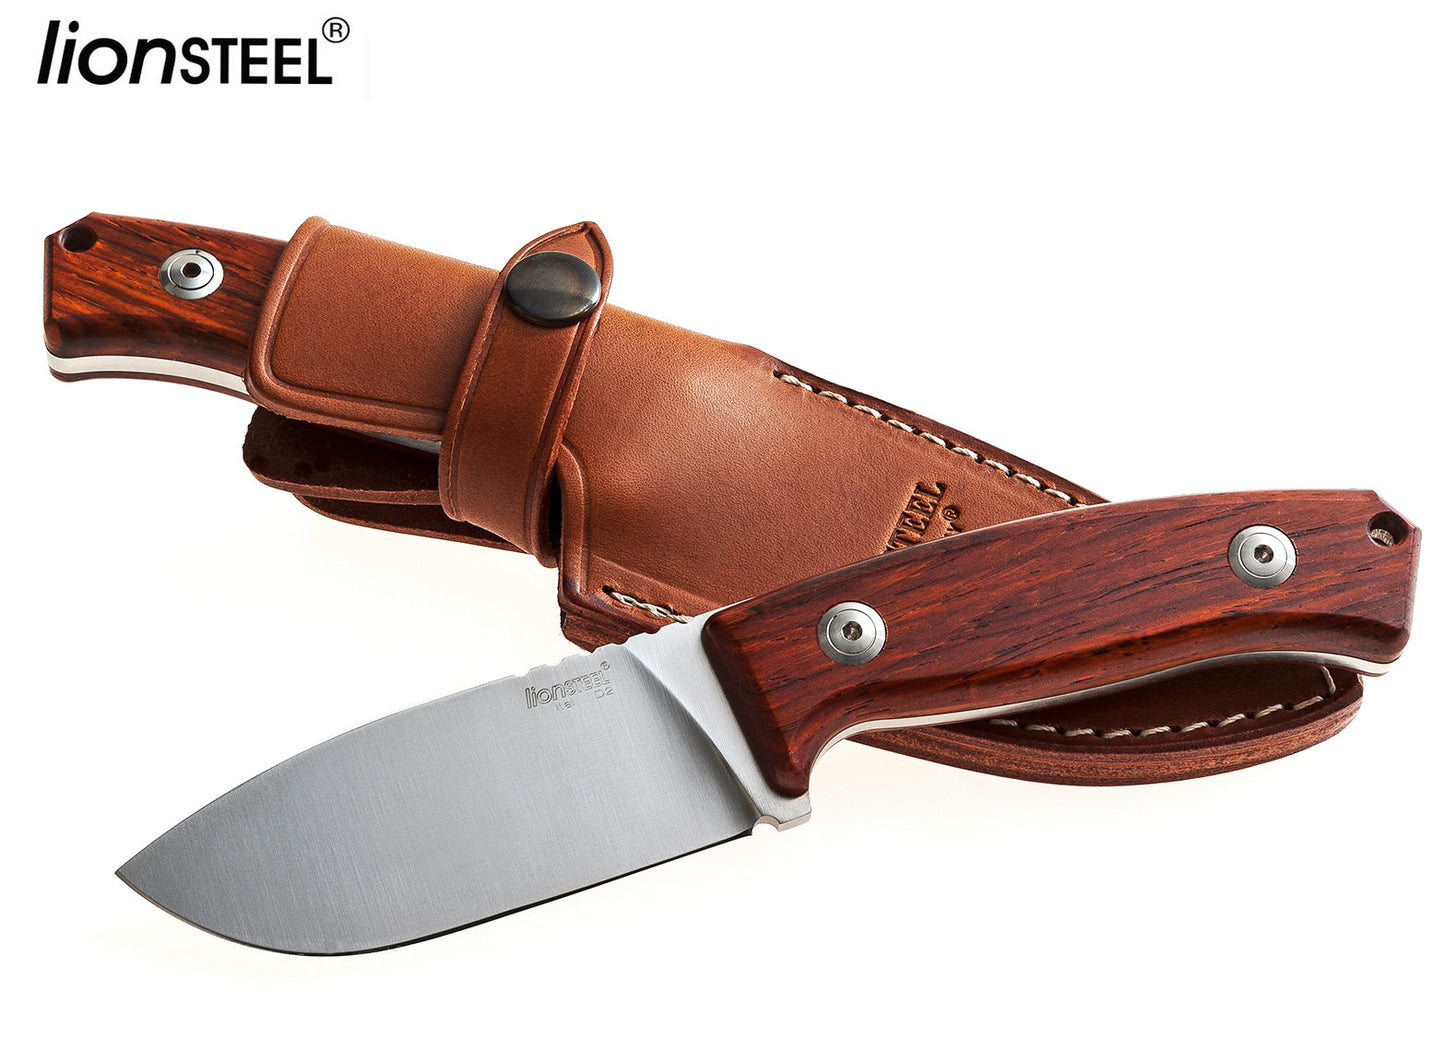 LionSteel M2 3.54" D2 Santos Wood Fixed Blade Knife with Leather Sheath